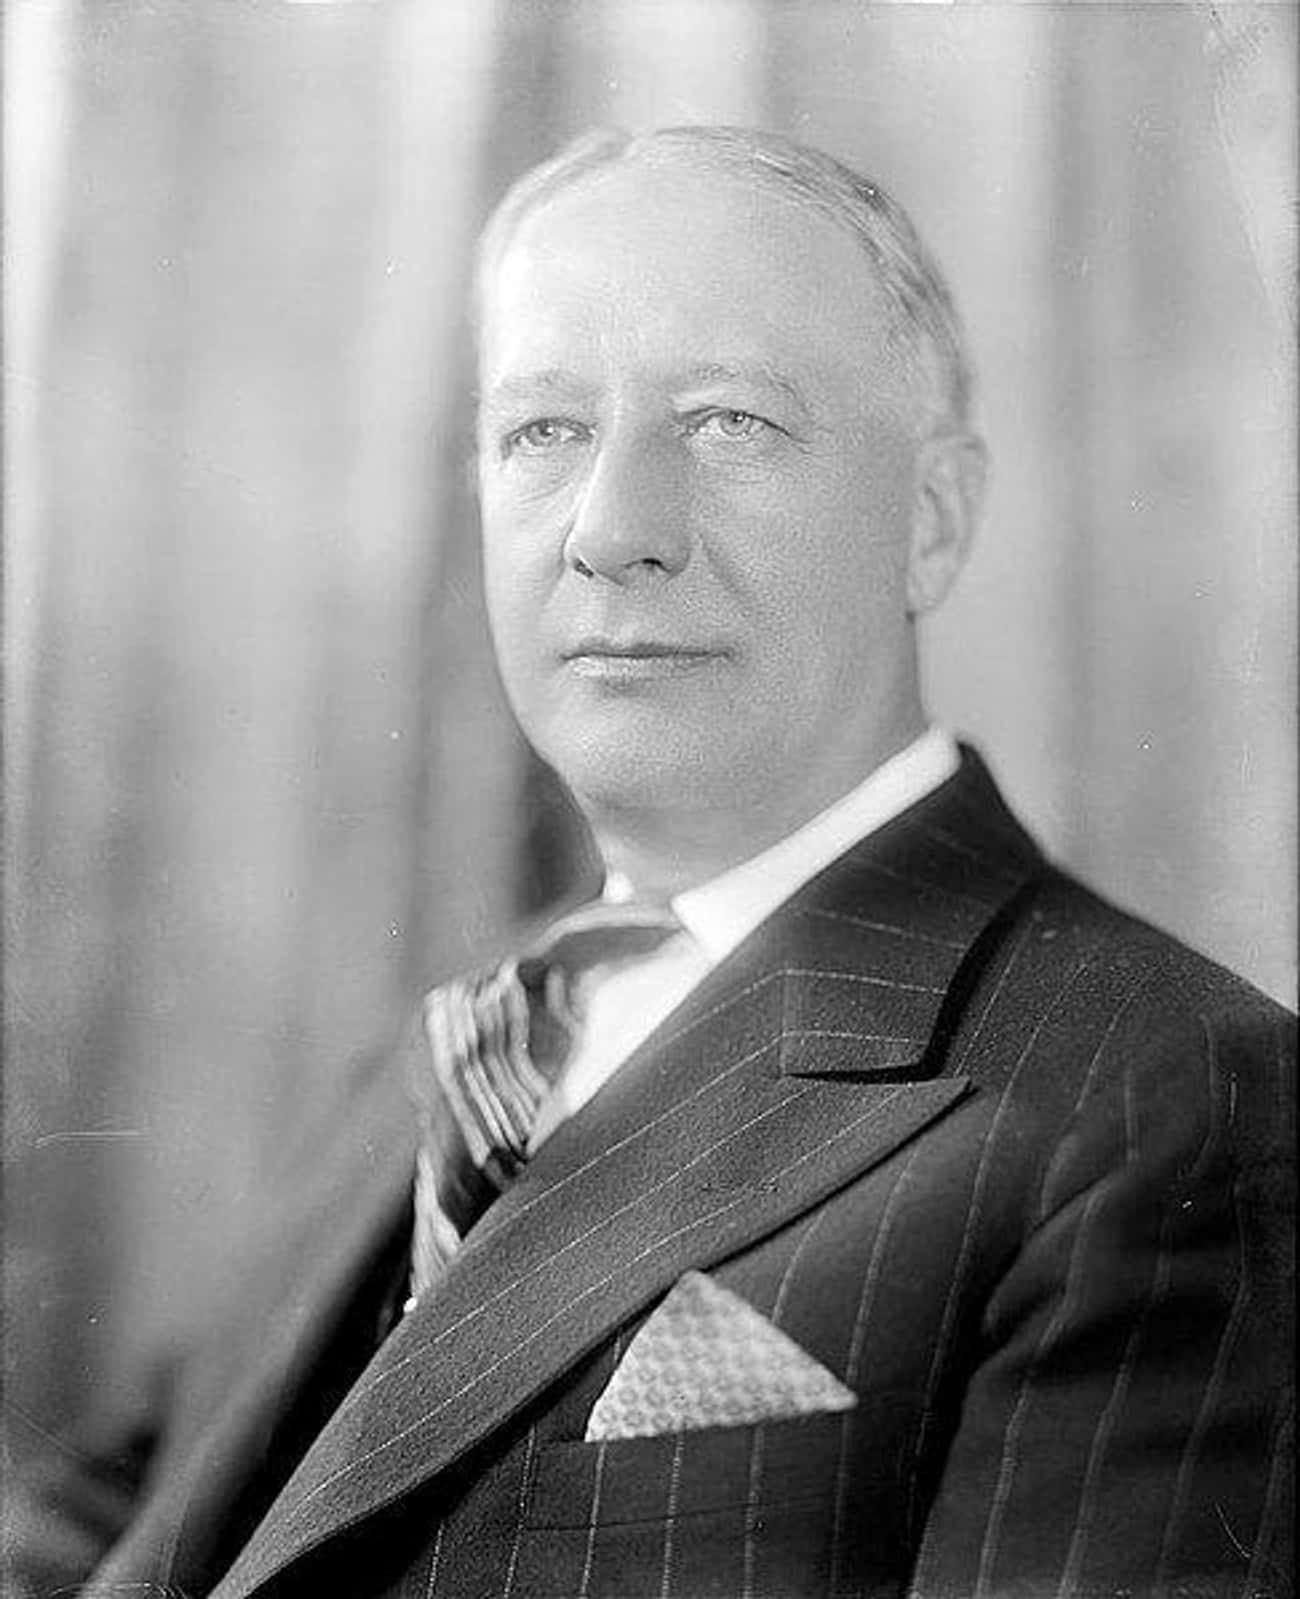 Al Smith Oversaw The Construction Of The Empire State Building